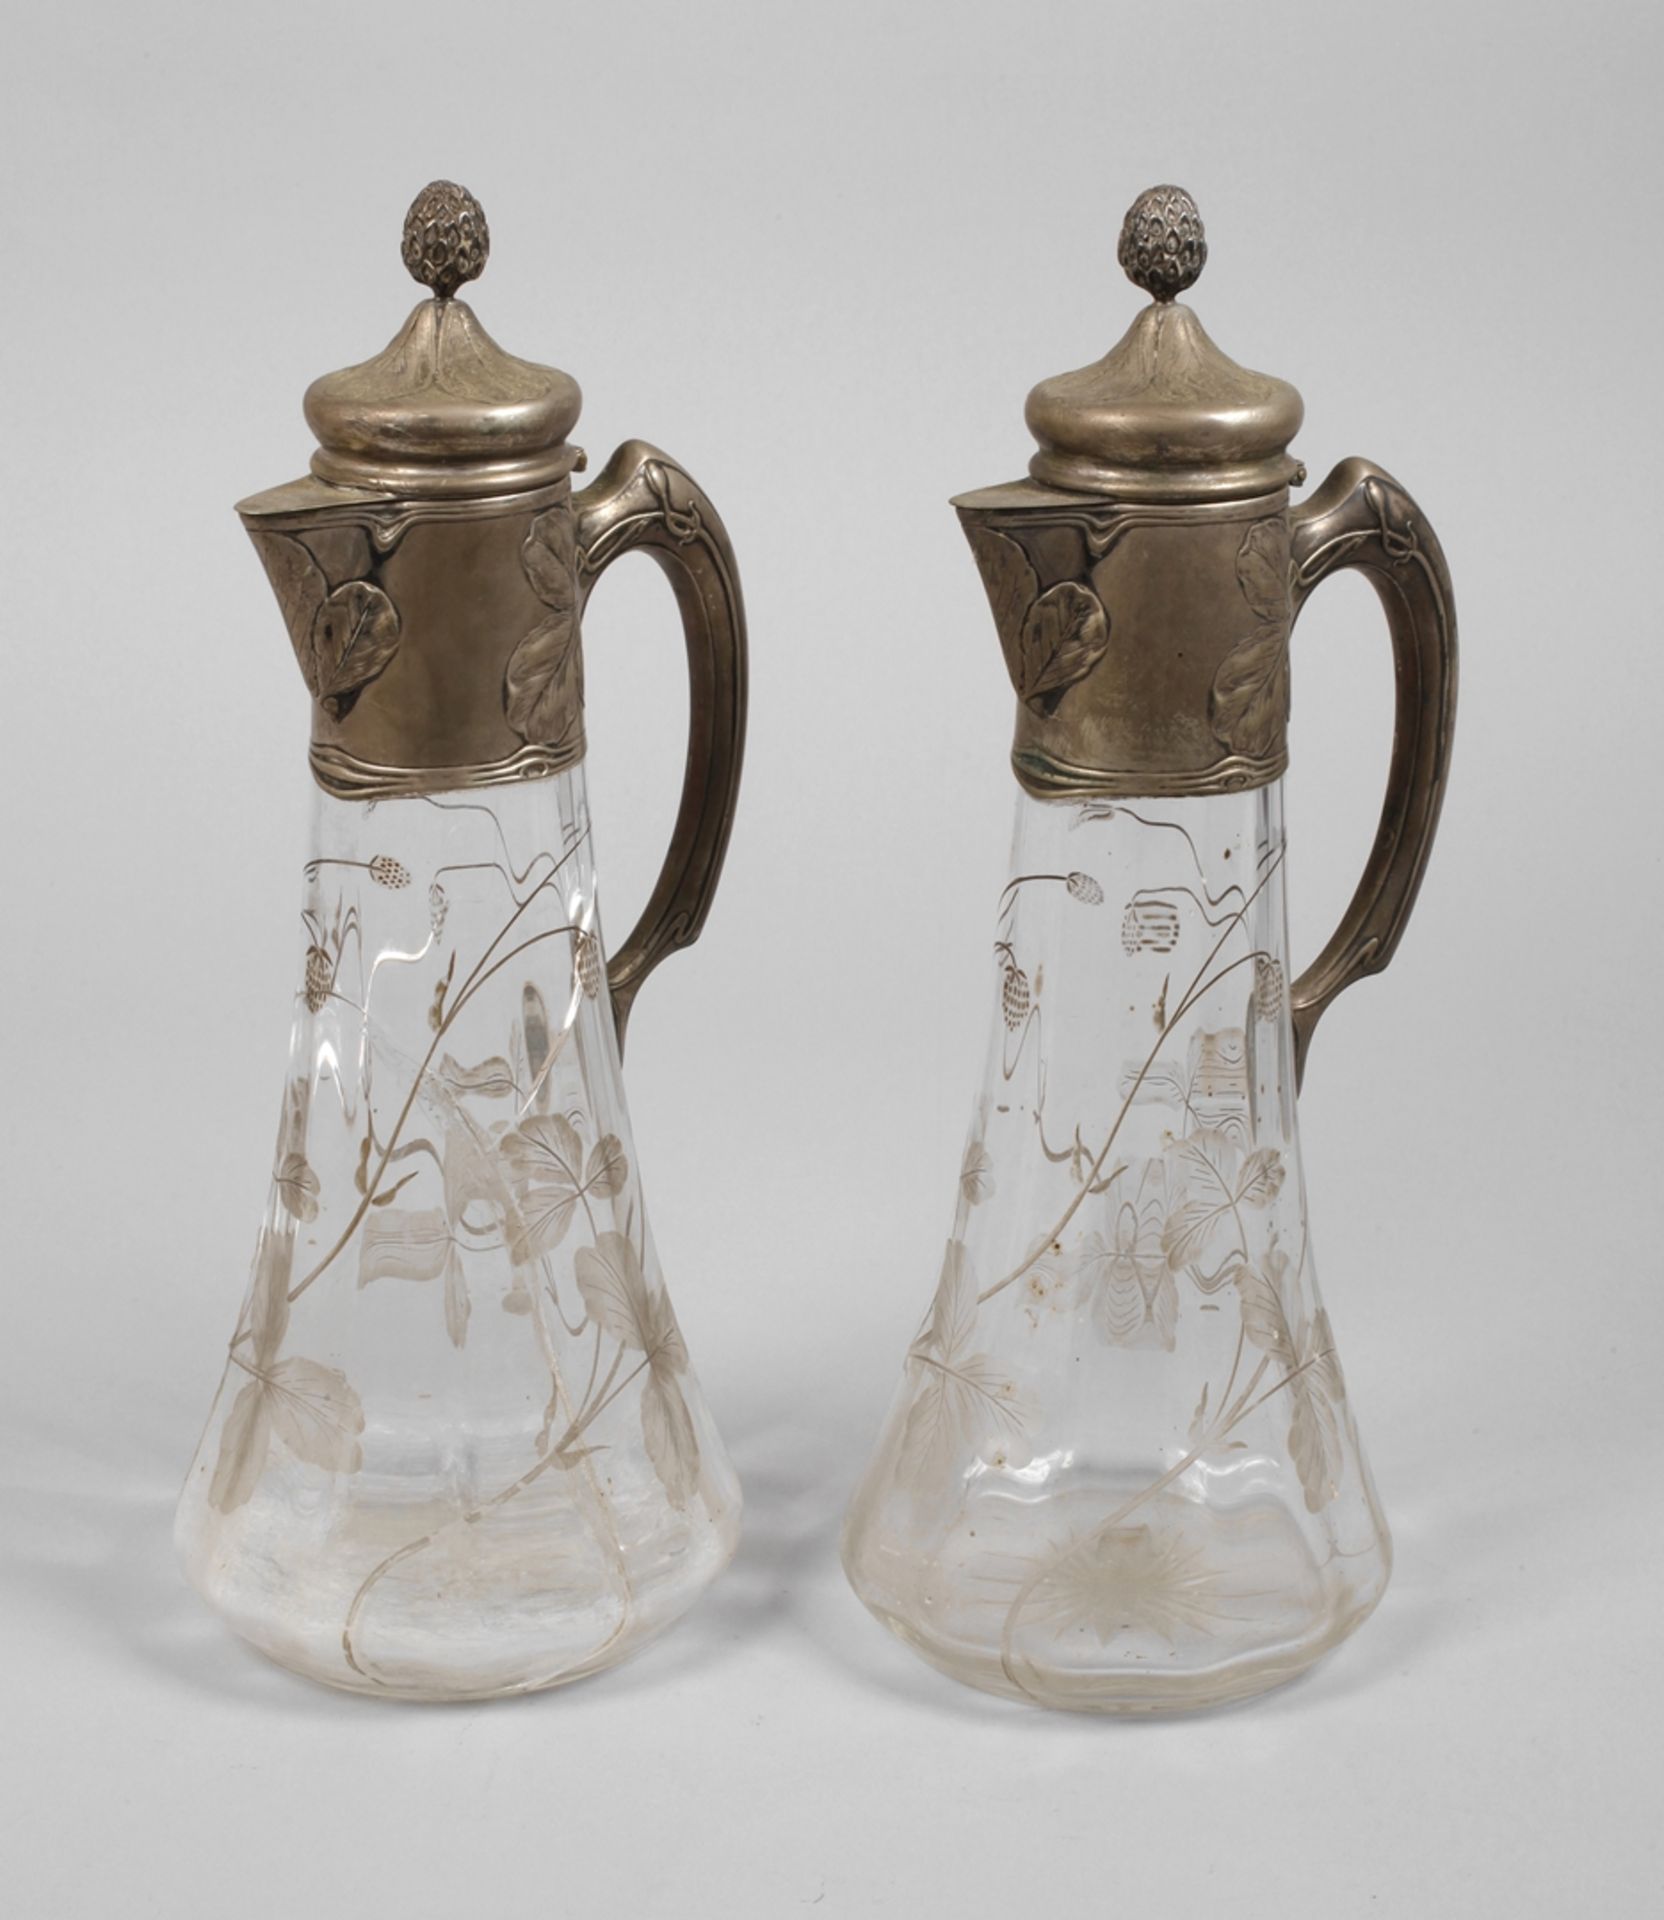 Two carafes with silver mount